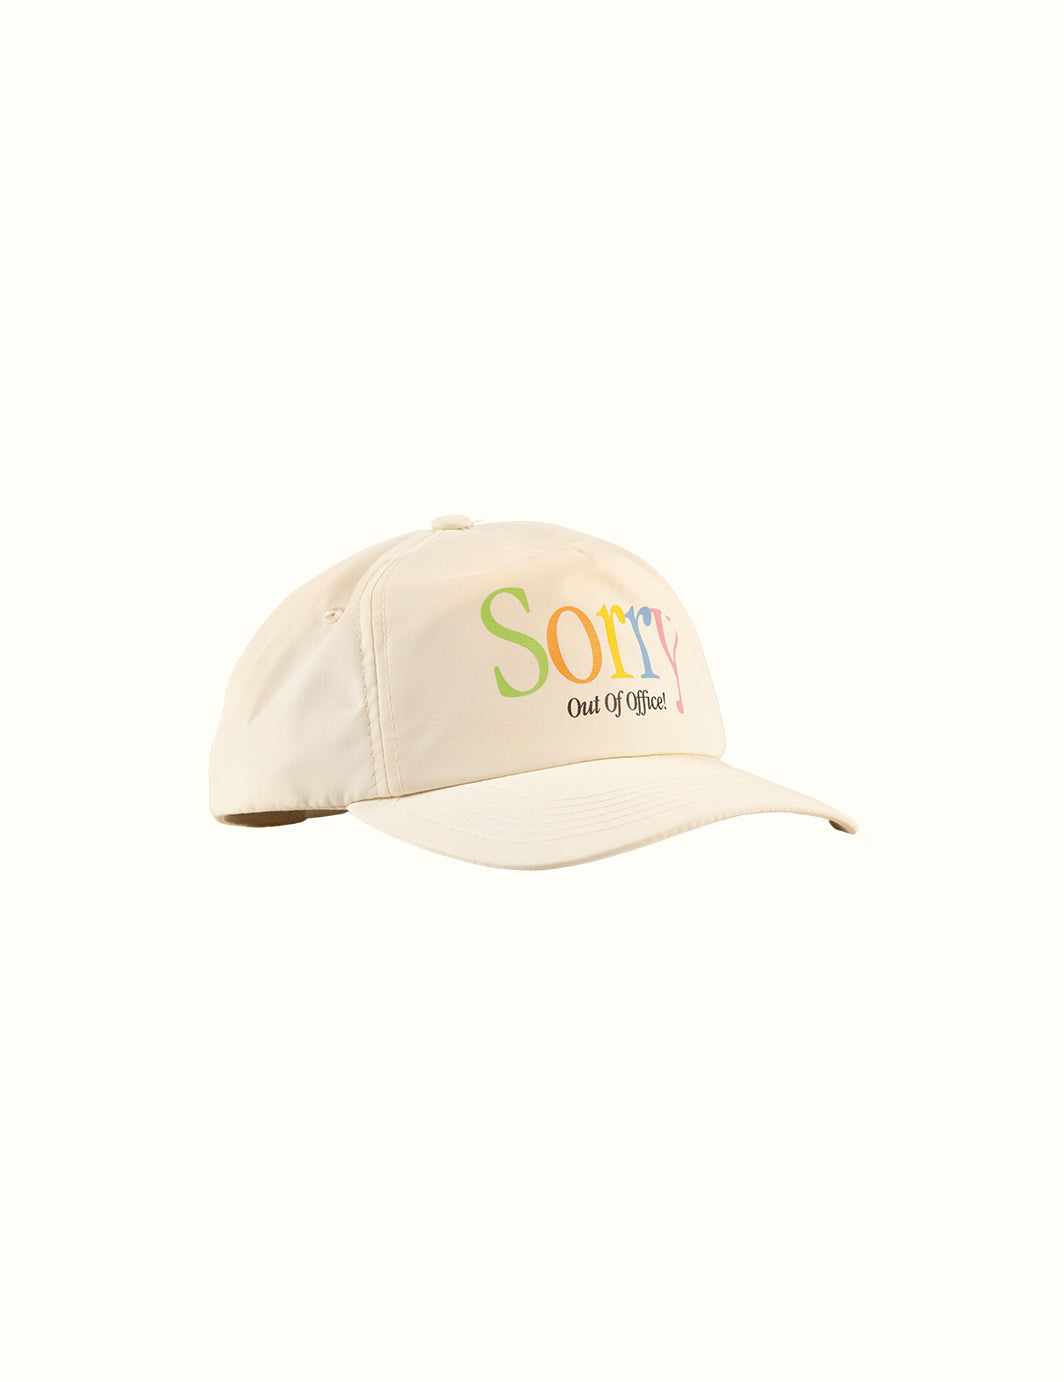 Sorry Out Of Office Hat - White